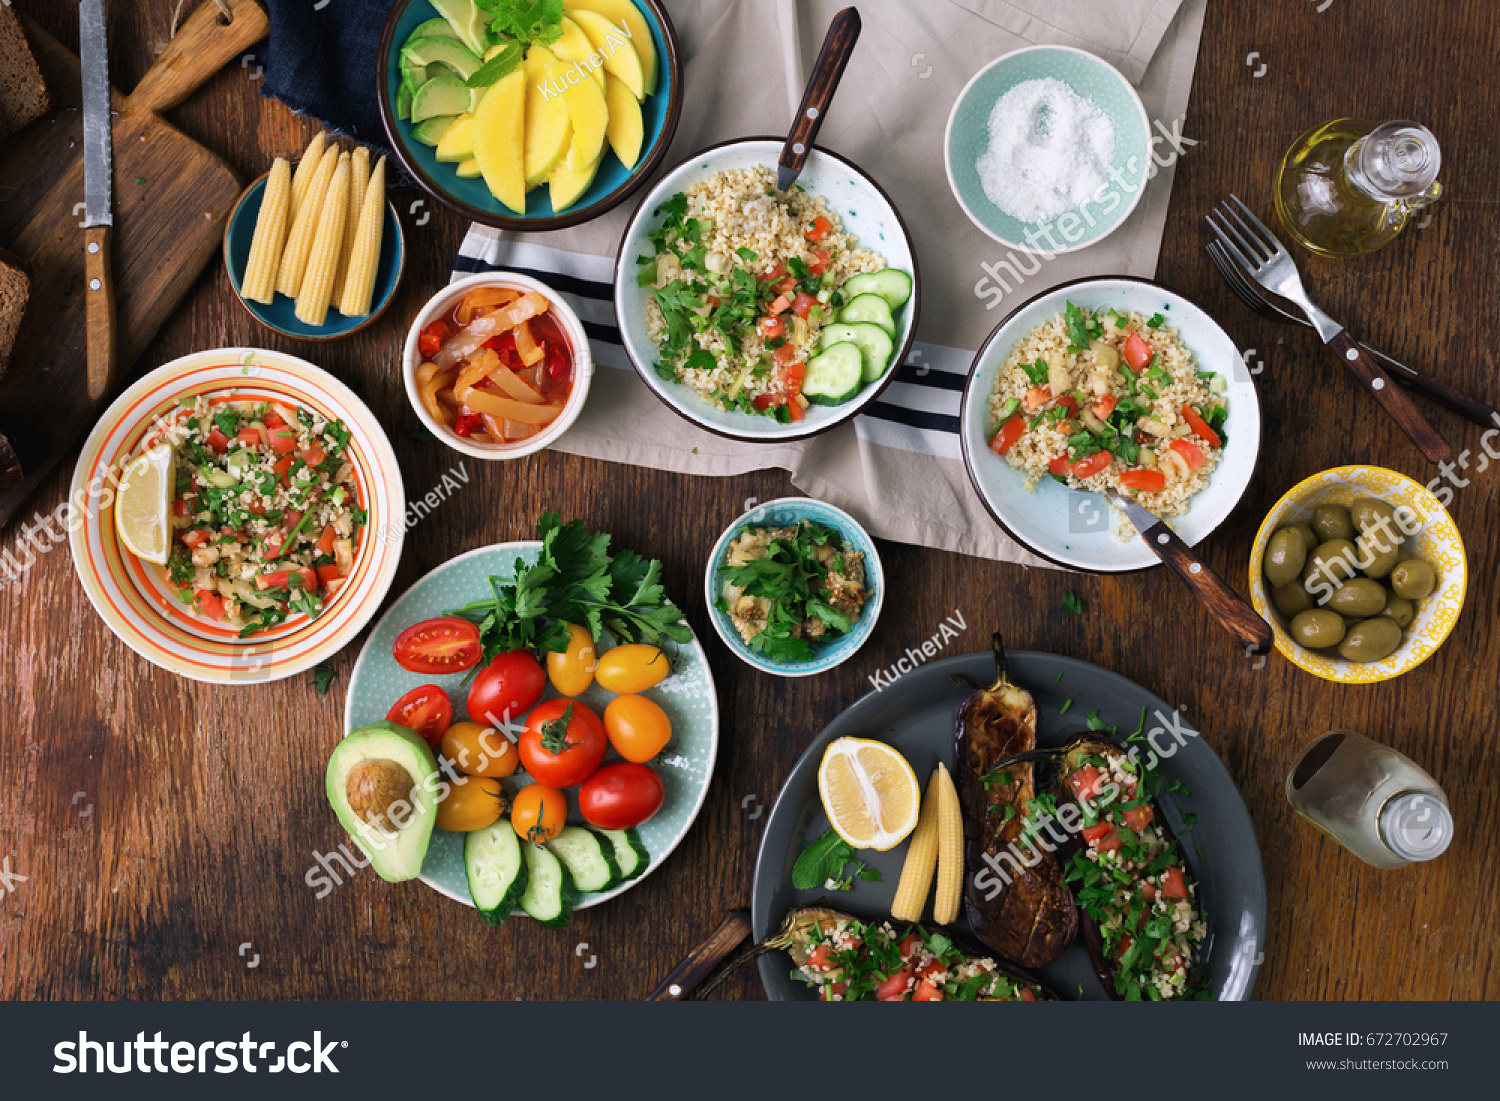 Vegetarian food concept. Set of healthy vegetarian food, salad with bulgur porridge and vegetables, stuffed eggplant, vegetables, mango, avocado and snacks on a wooden table, top view #672702967